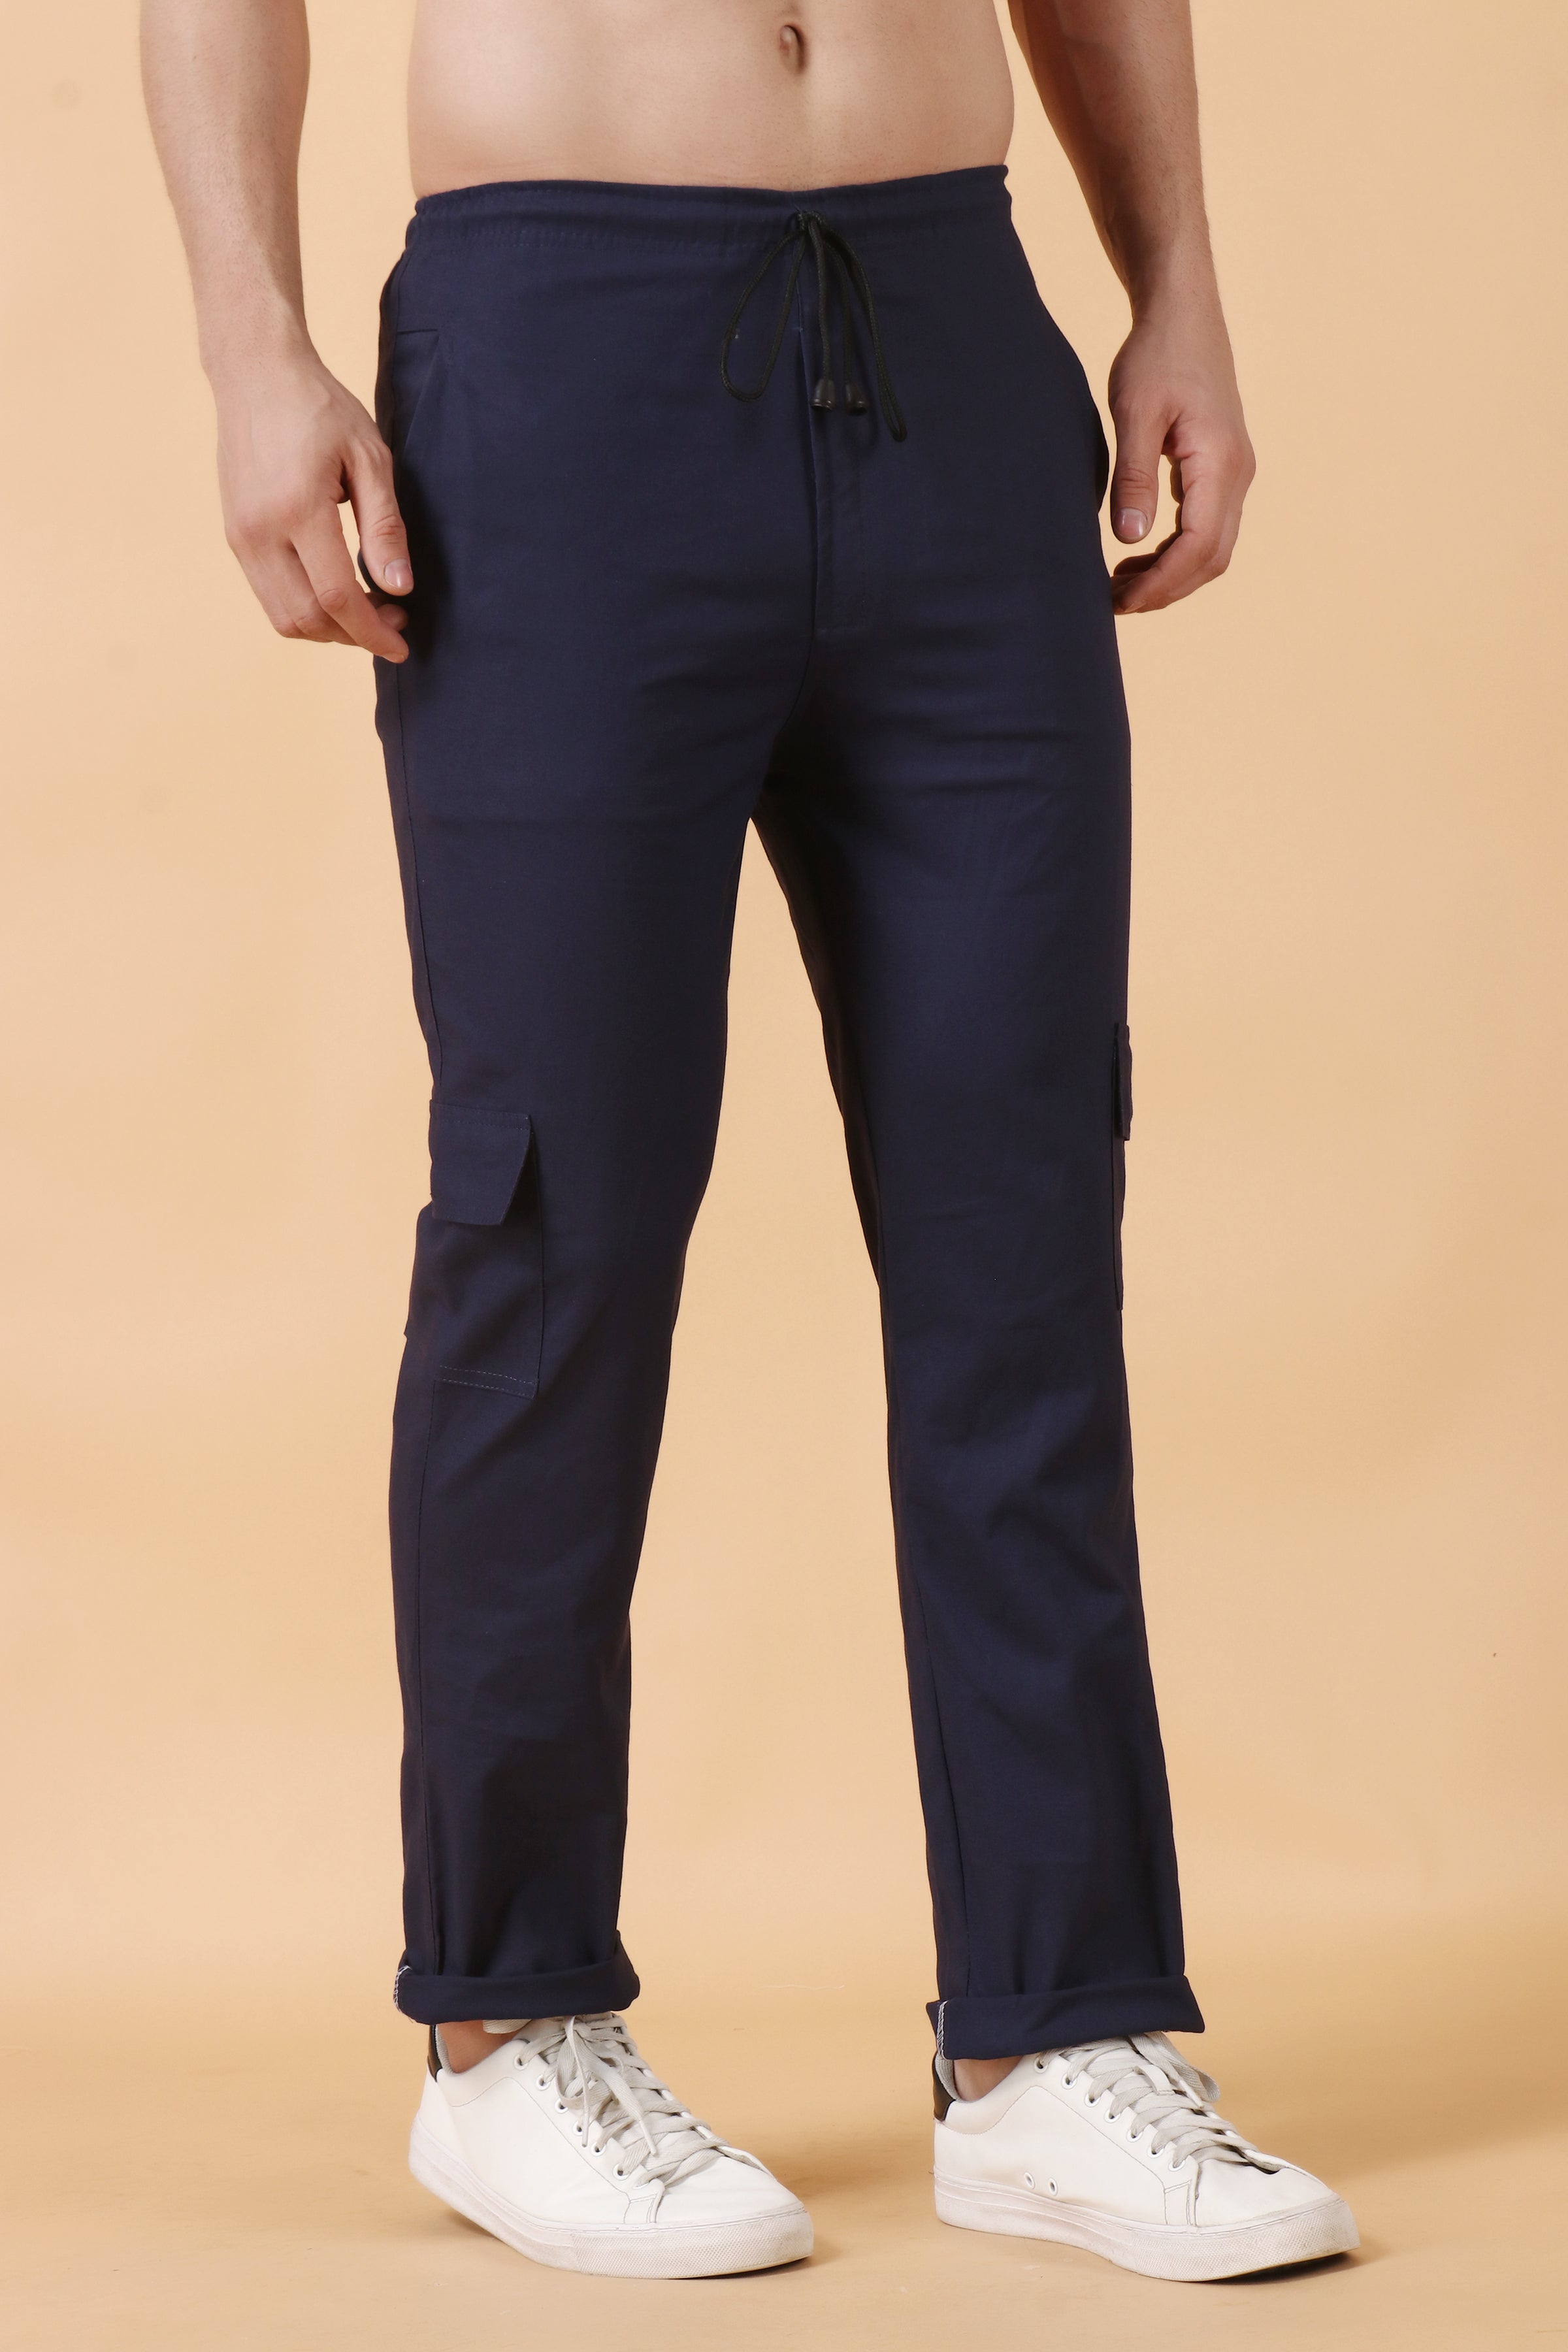 Buy Old Navy Loose Taper NonStretch 94 Cargo Pants for Men 2023 Online   ZALORA Philippines